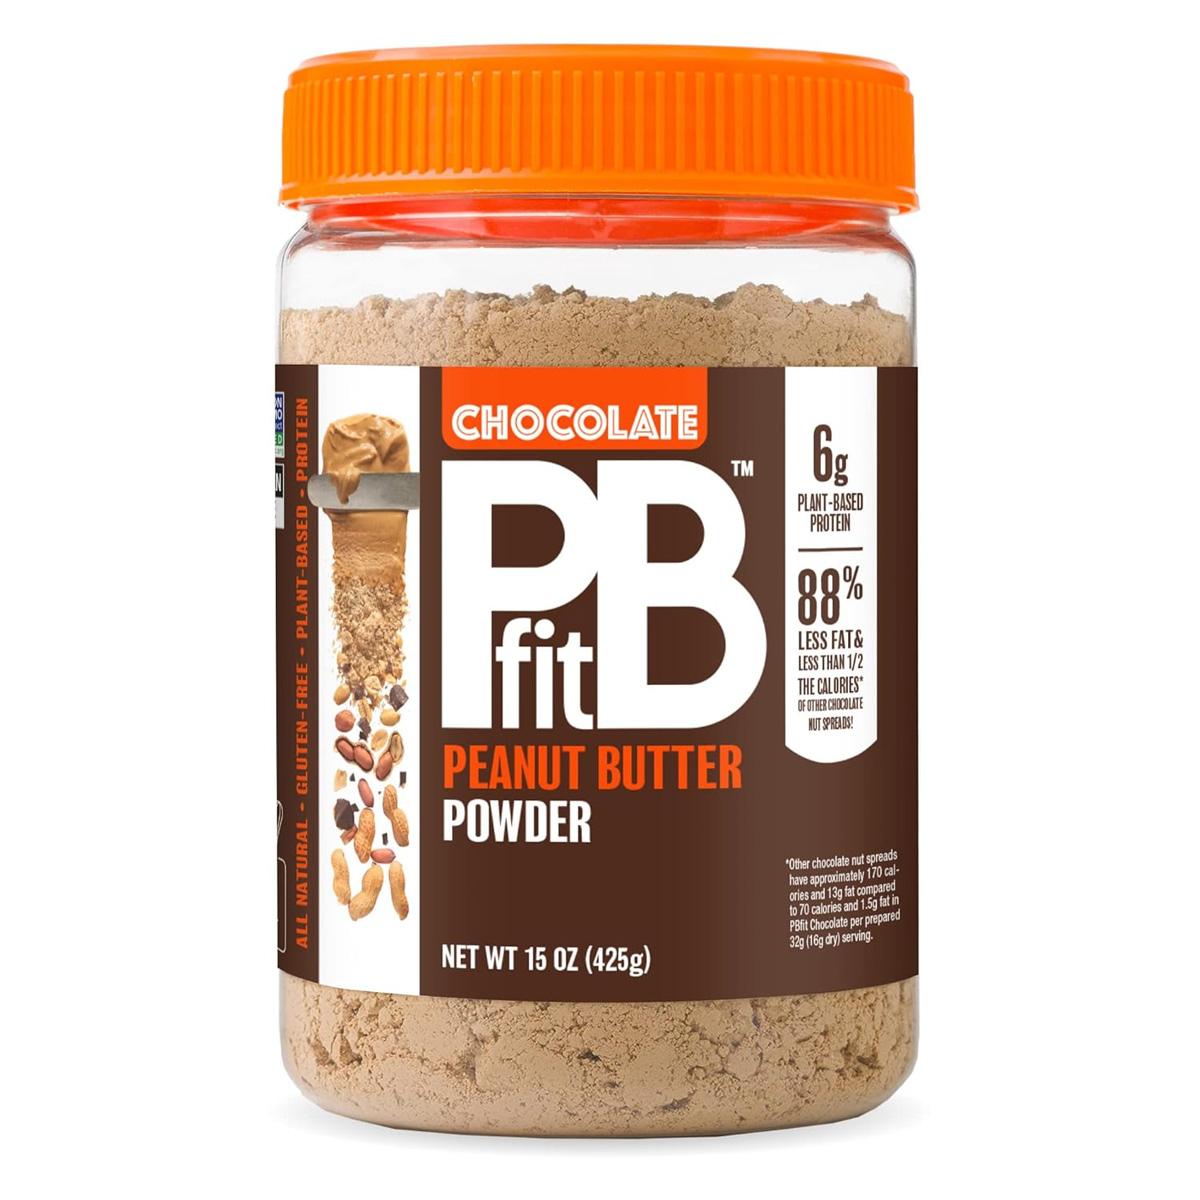 PBfit All-Natural Chocolate Peanut Butter Powder for $5.42